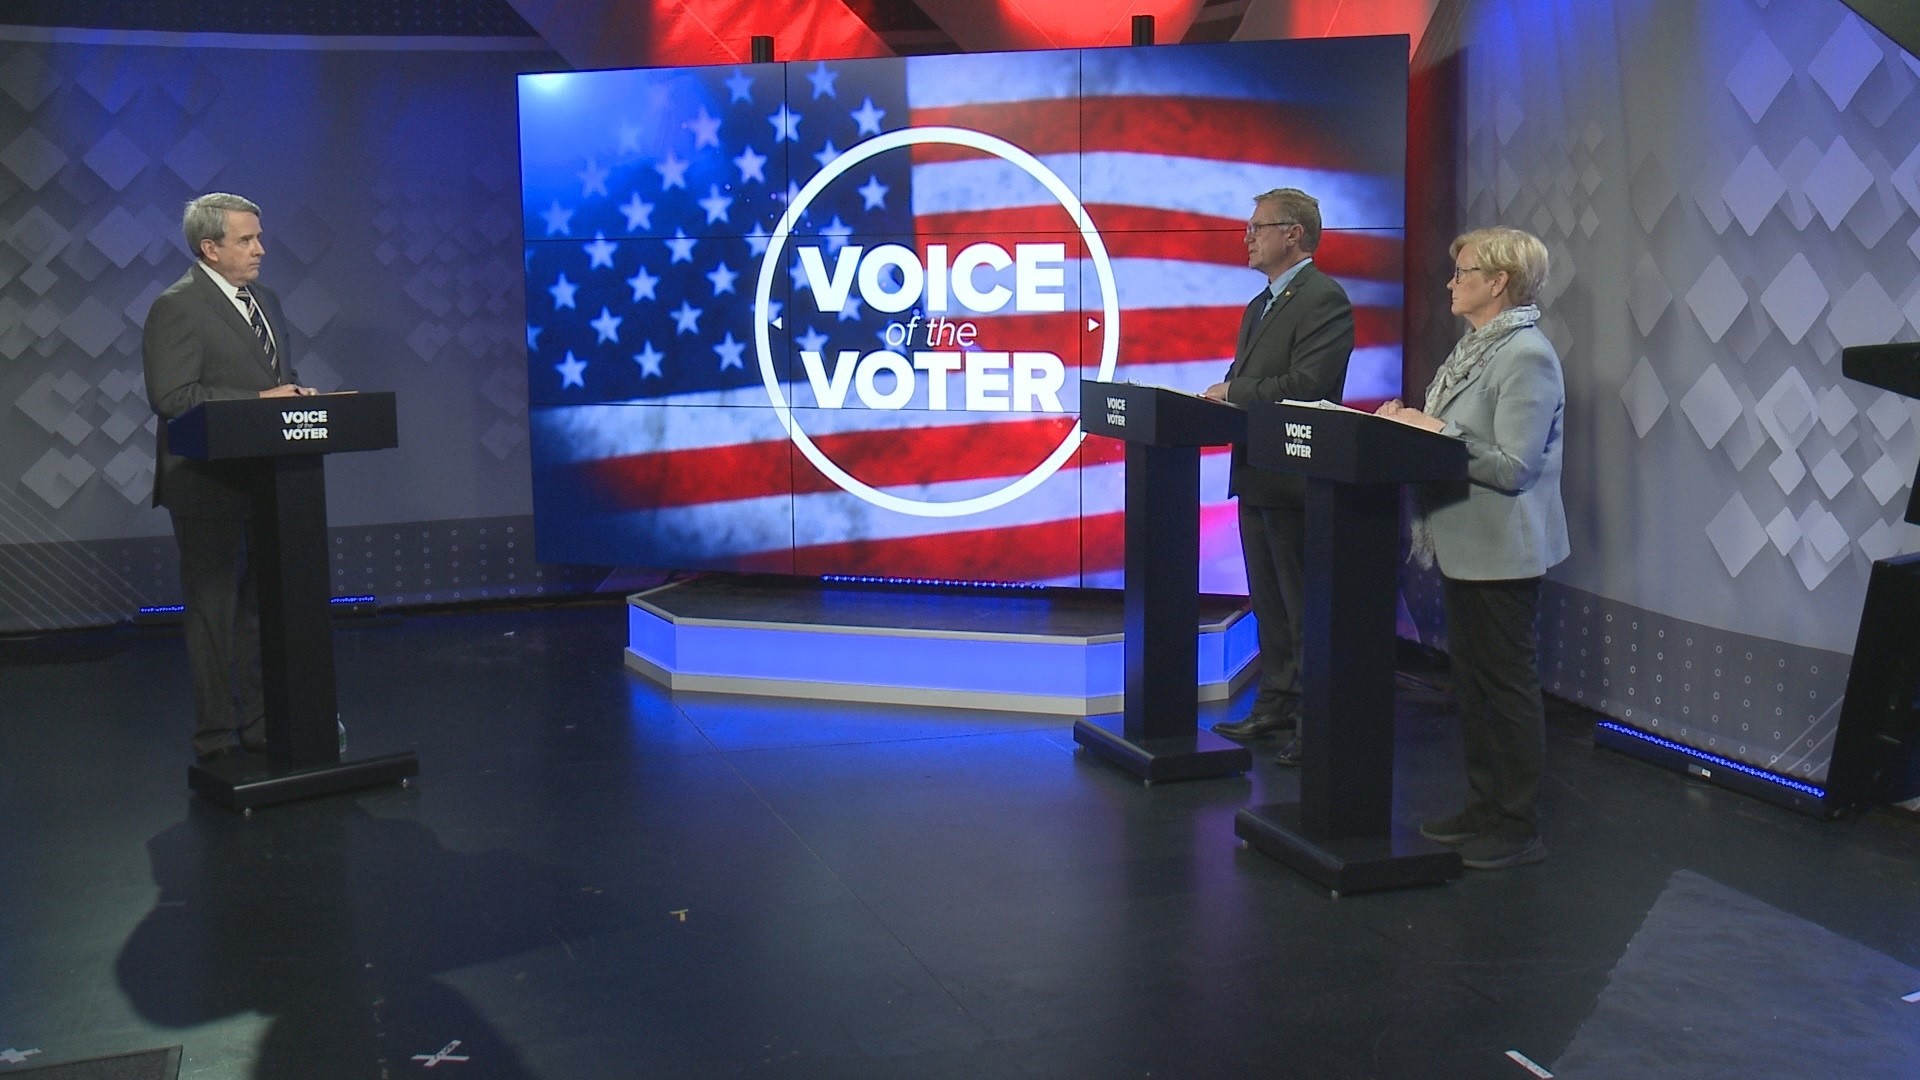 Incumbent Rep. Chellie Pingree, D-Maine, and Republican hopeful Ed Thelander fielded questions in the Voice of the Voter forum.